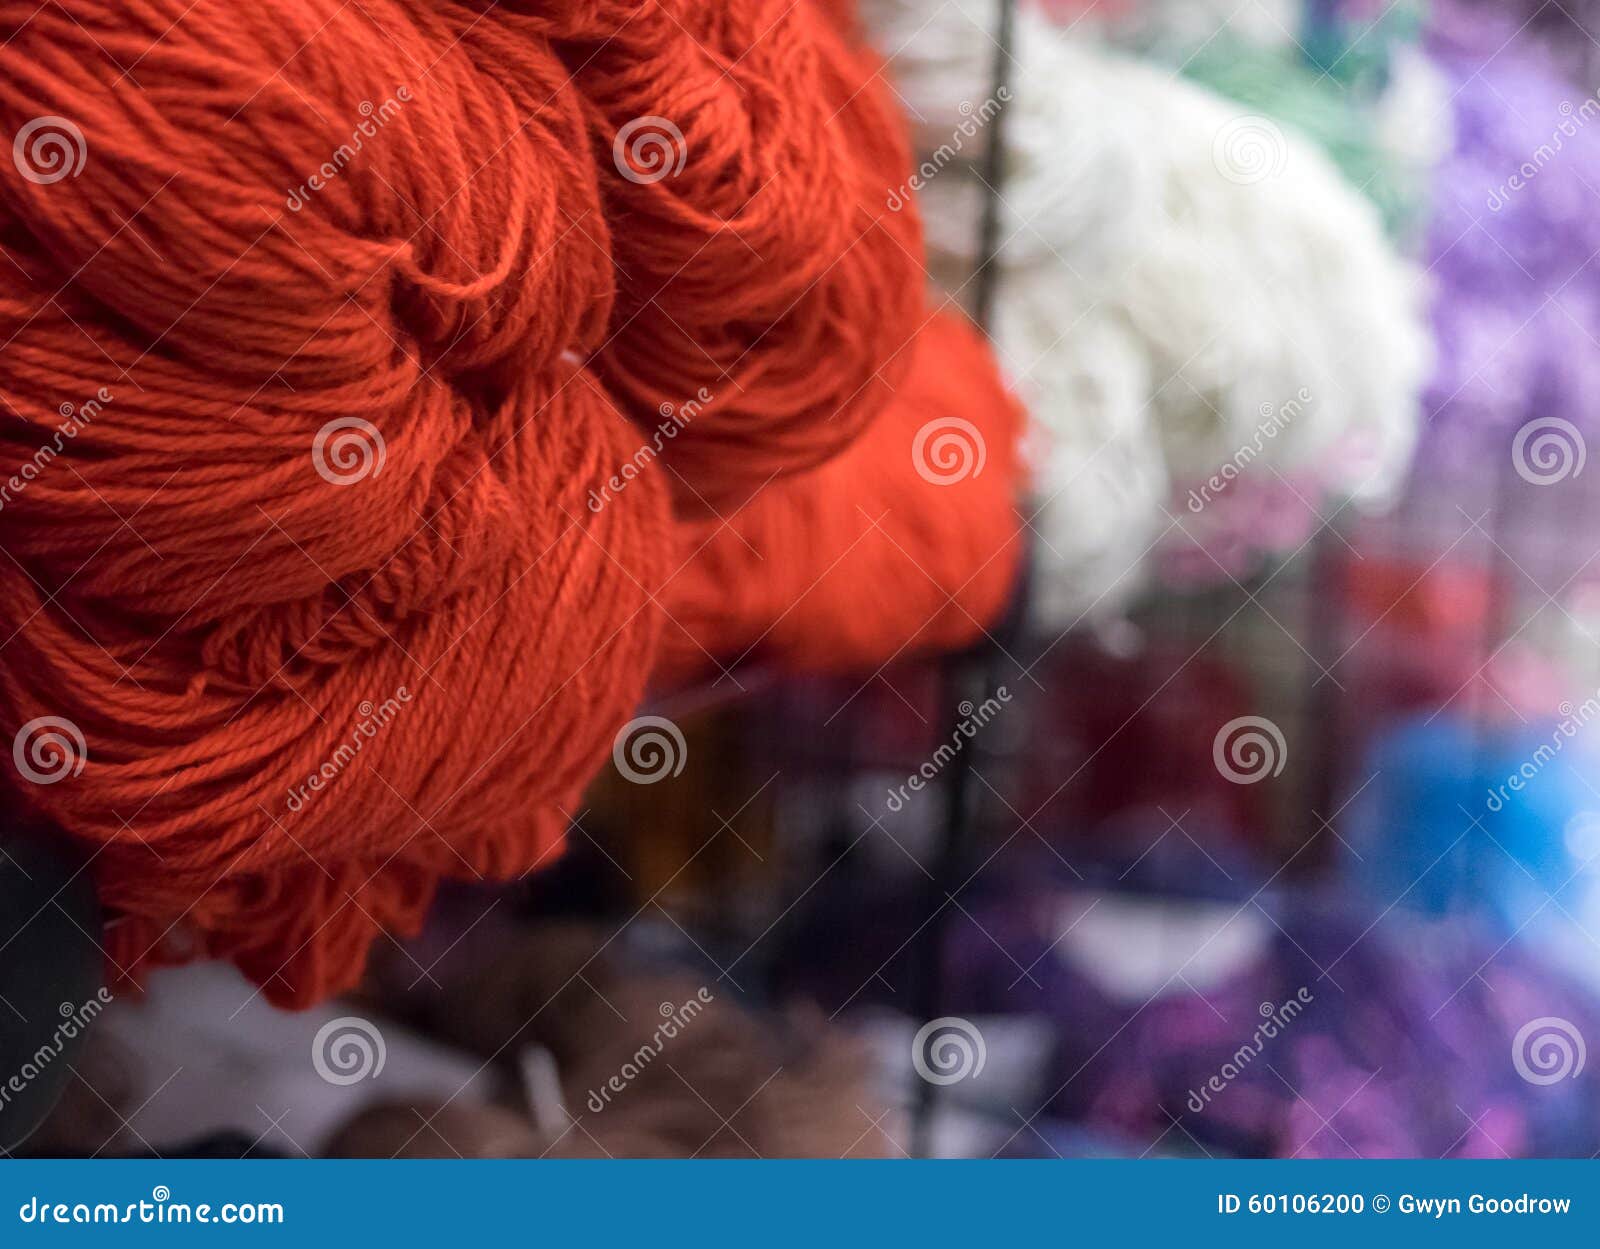 197 Bundles Yarn Stock Photos - Free & Royalty-Free Stock Photos from  Dreamstime